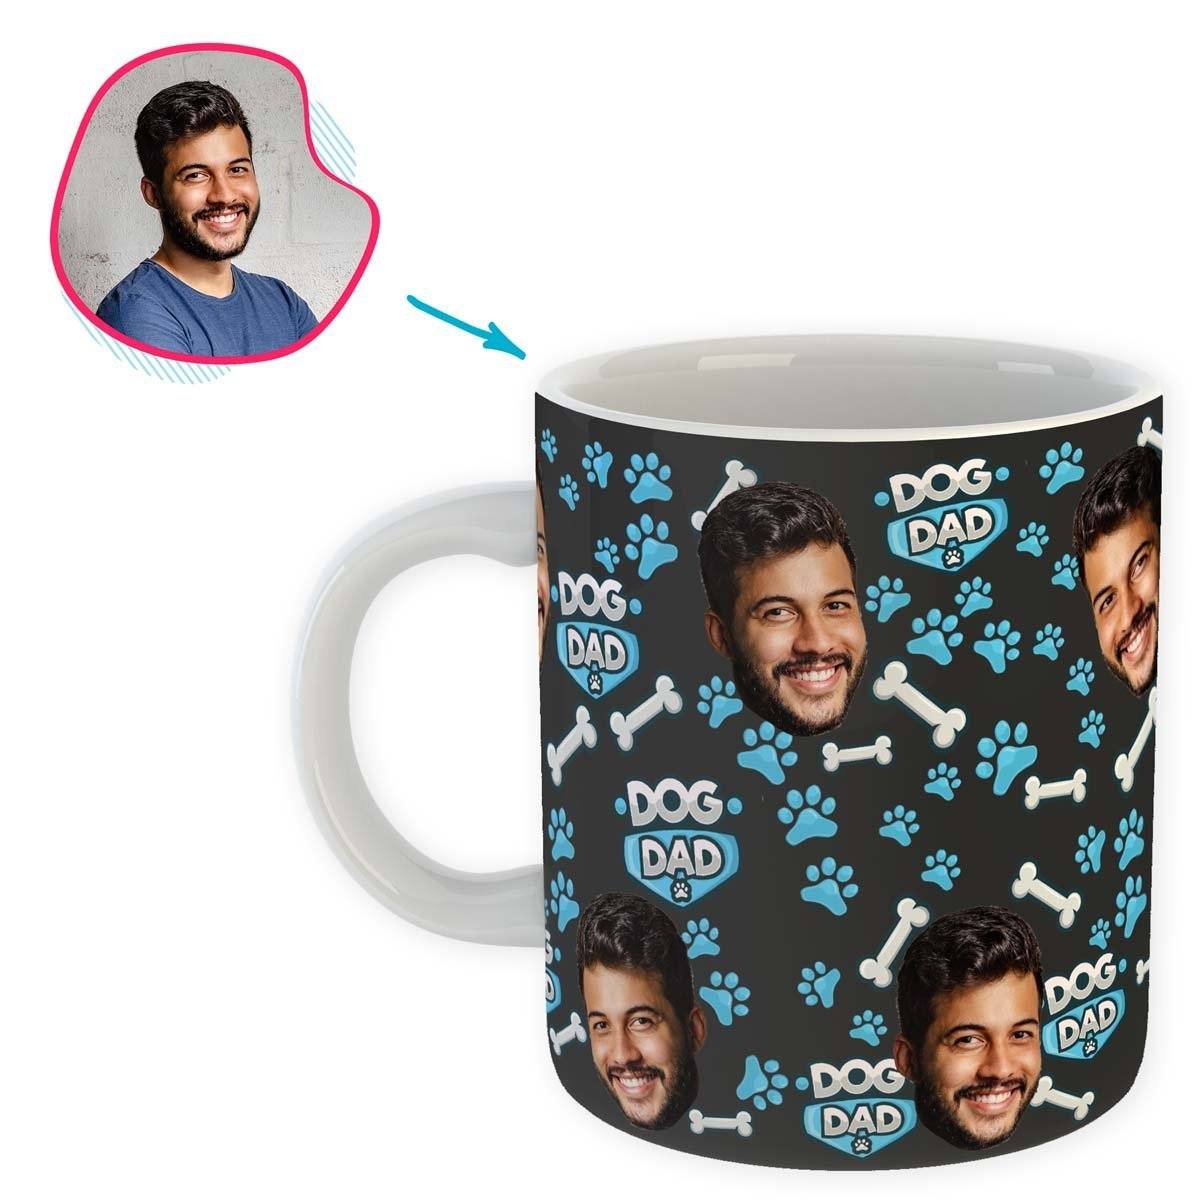 dark Dog Dad mug personalized with photo of face printed on it